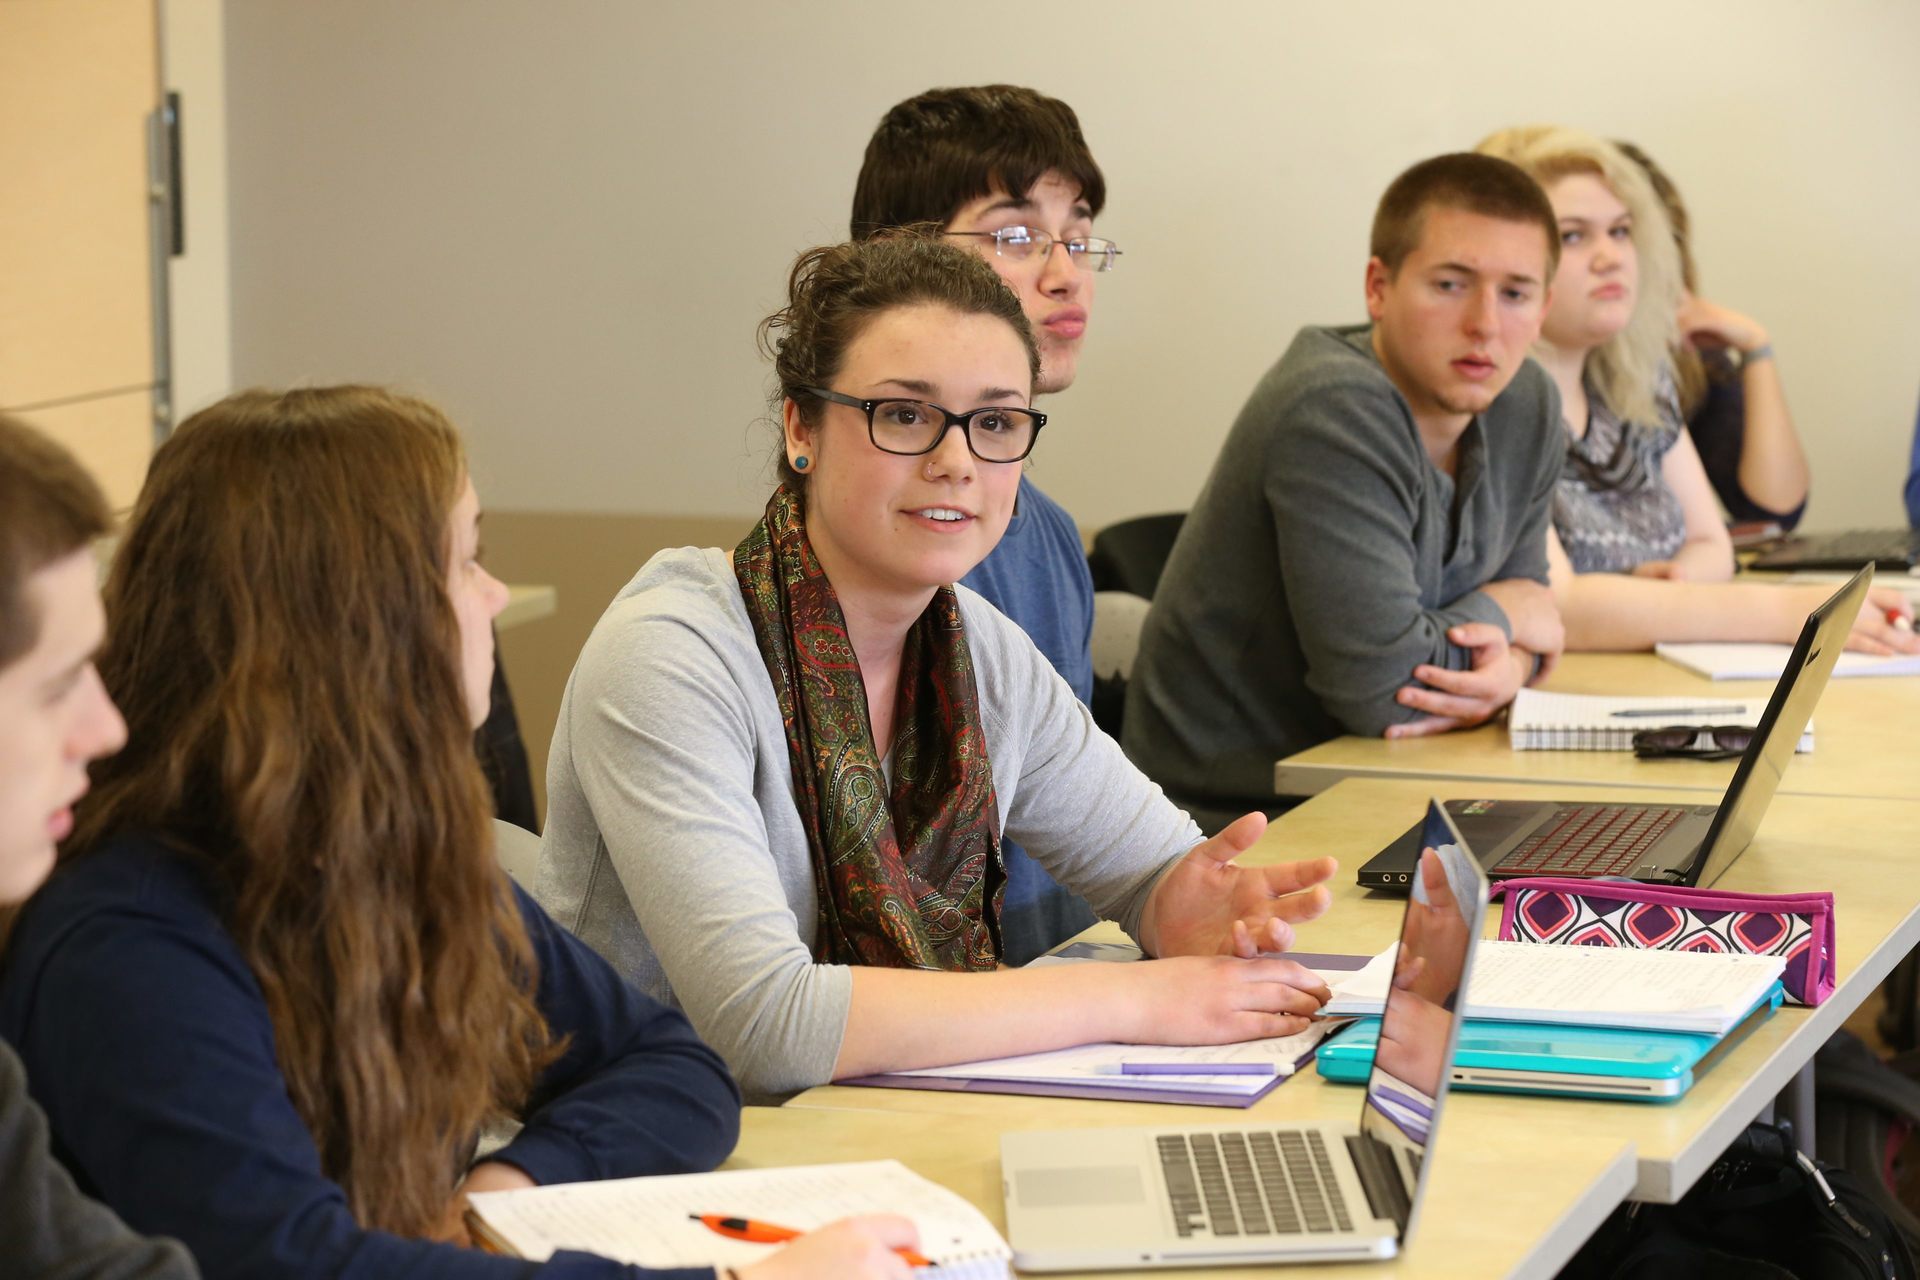 A BGSU graduate class discussing subjects with diverse colleagues is often the most valued form of learning.   